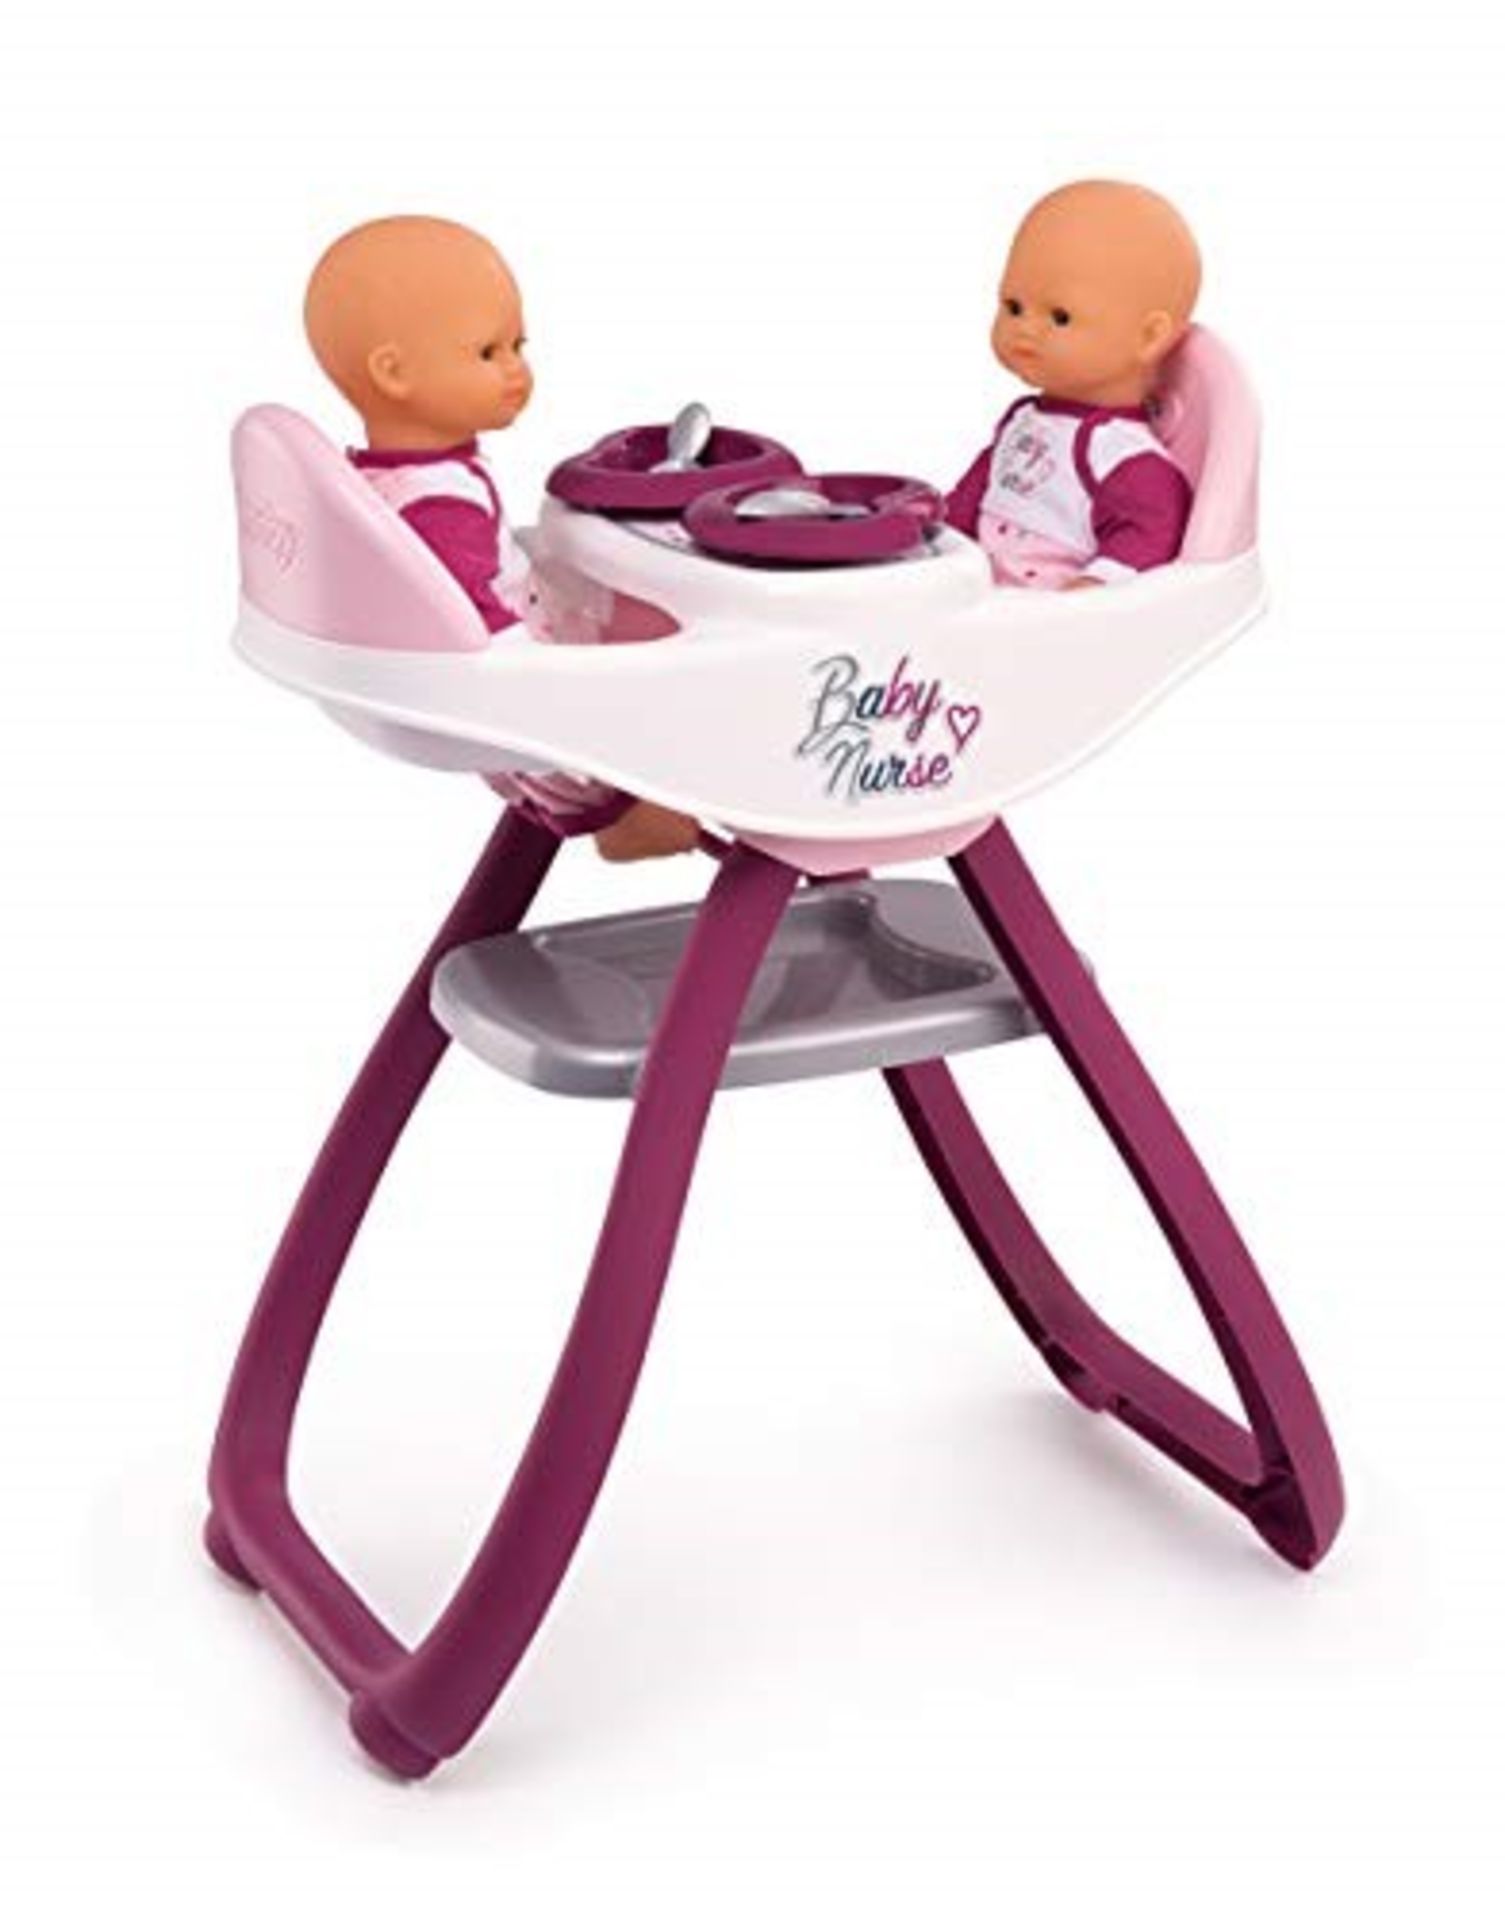 Smoby 220344 Baby Nurse Twin High Chair for Dolls and Dolls - Can be Converted into Ro